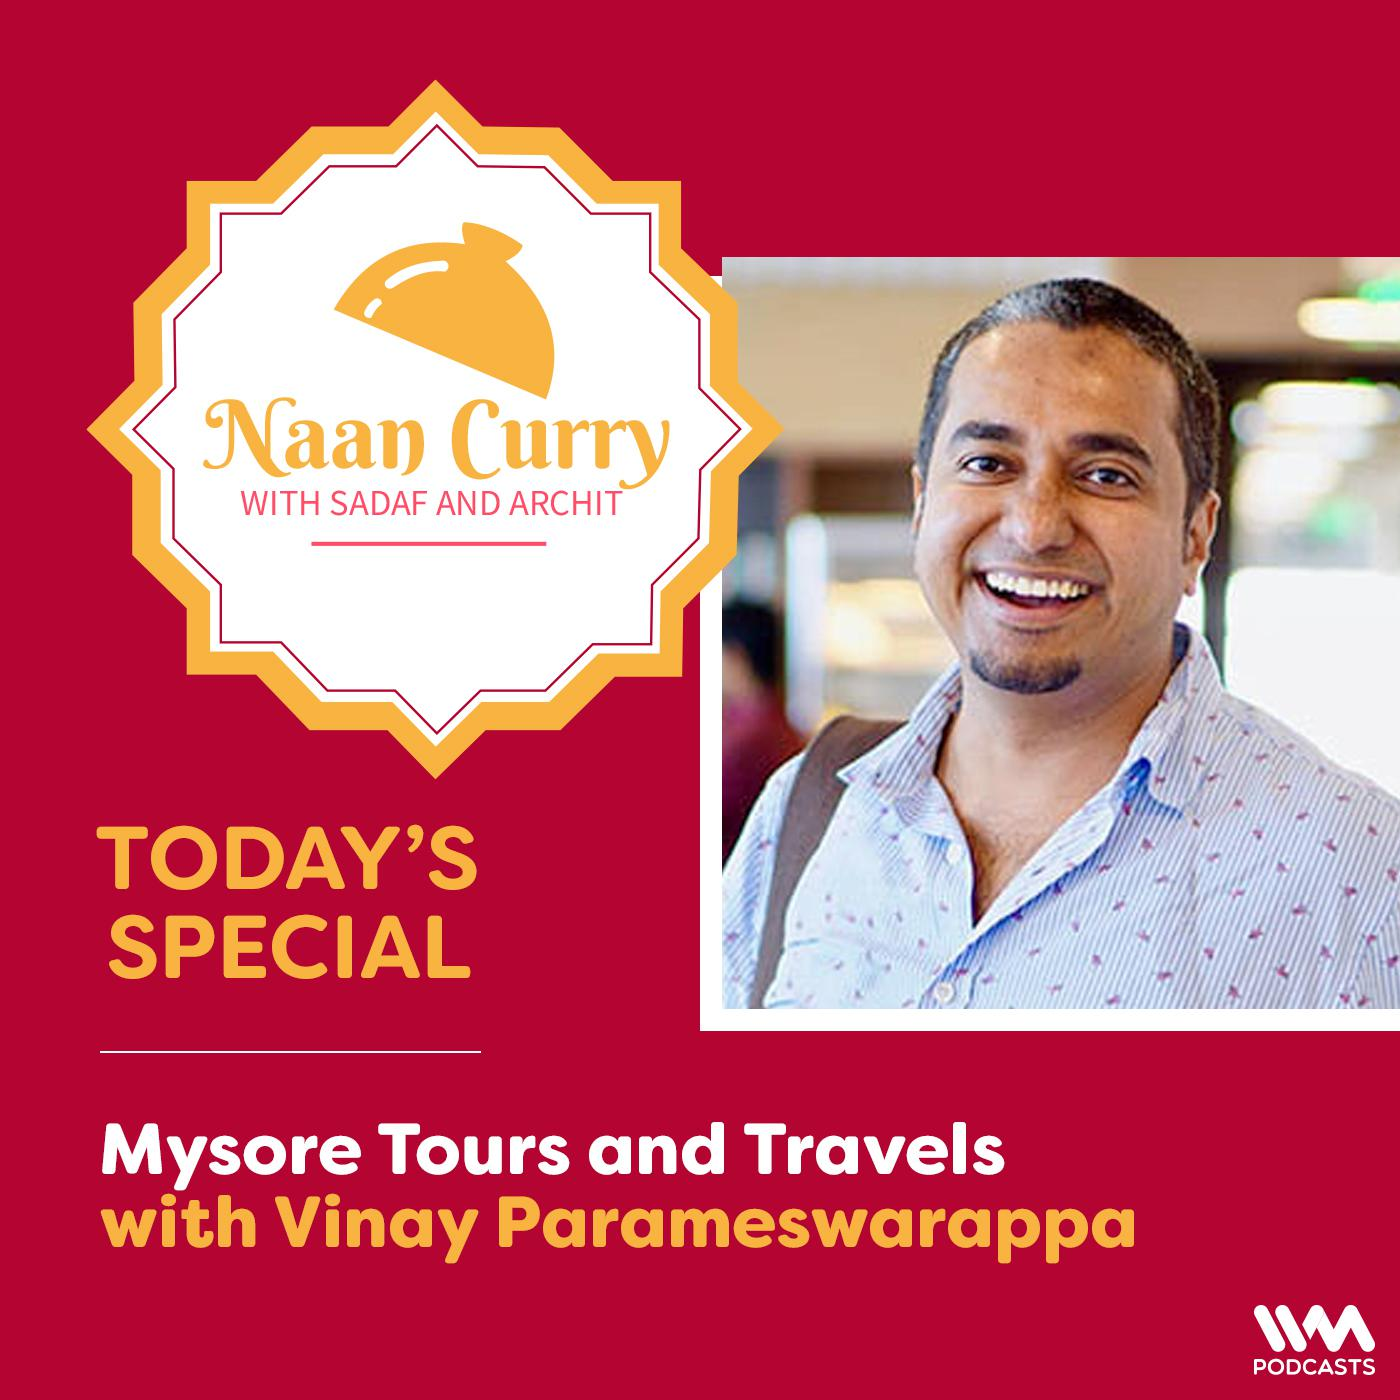 Mysore Tours and Travels with Vinay Parameswarappa